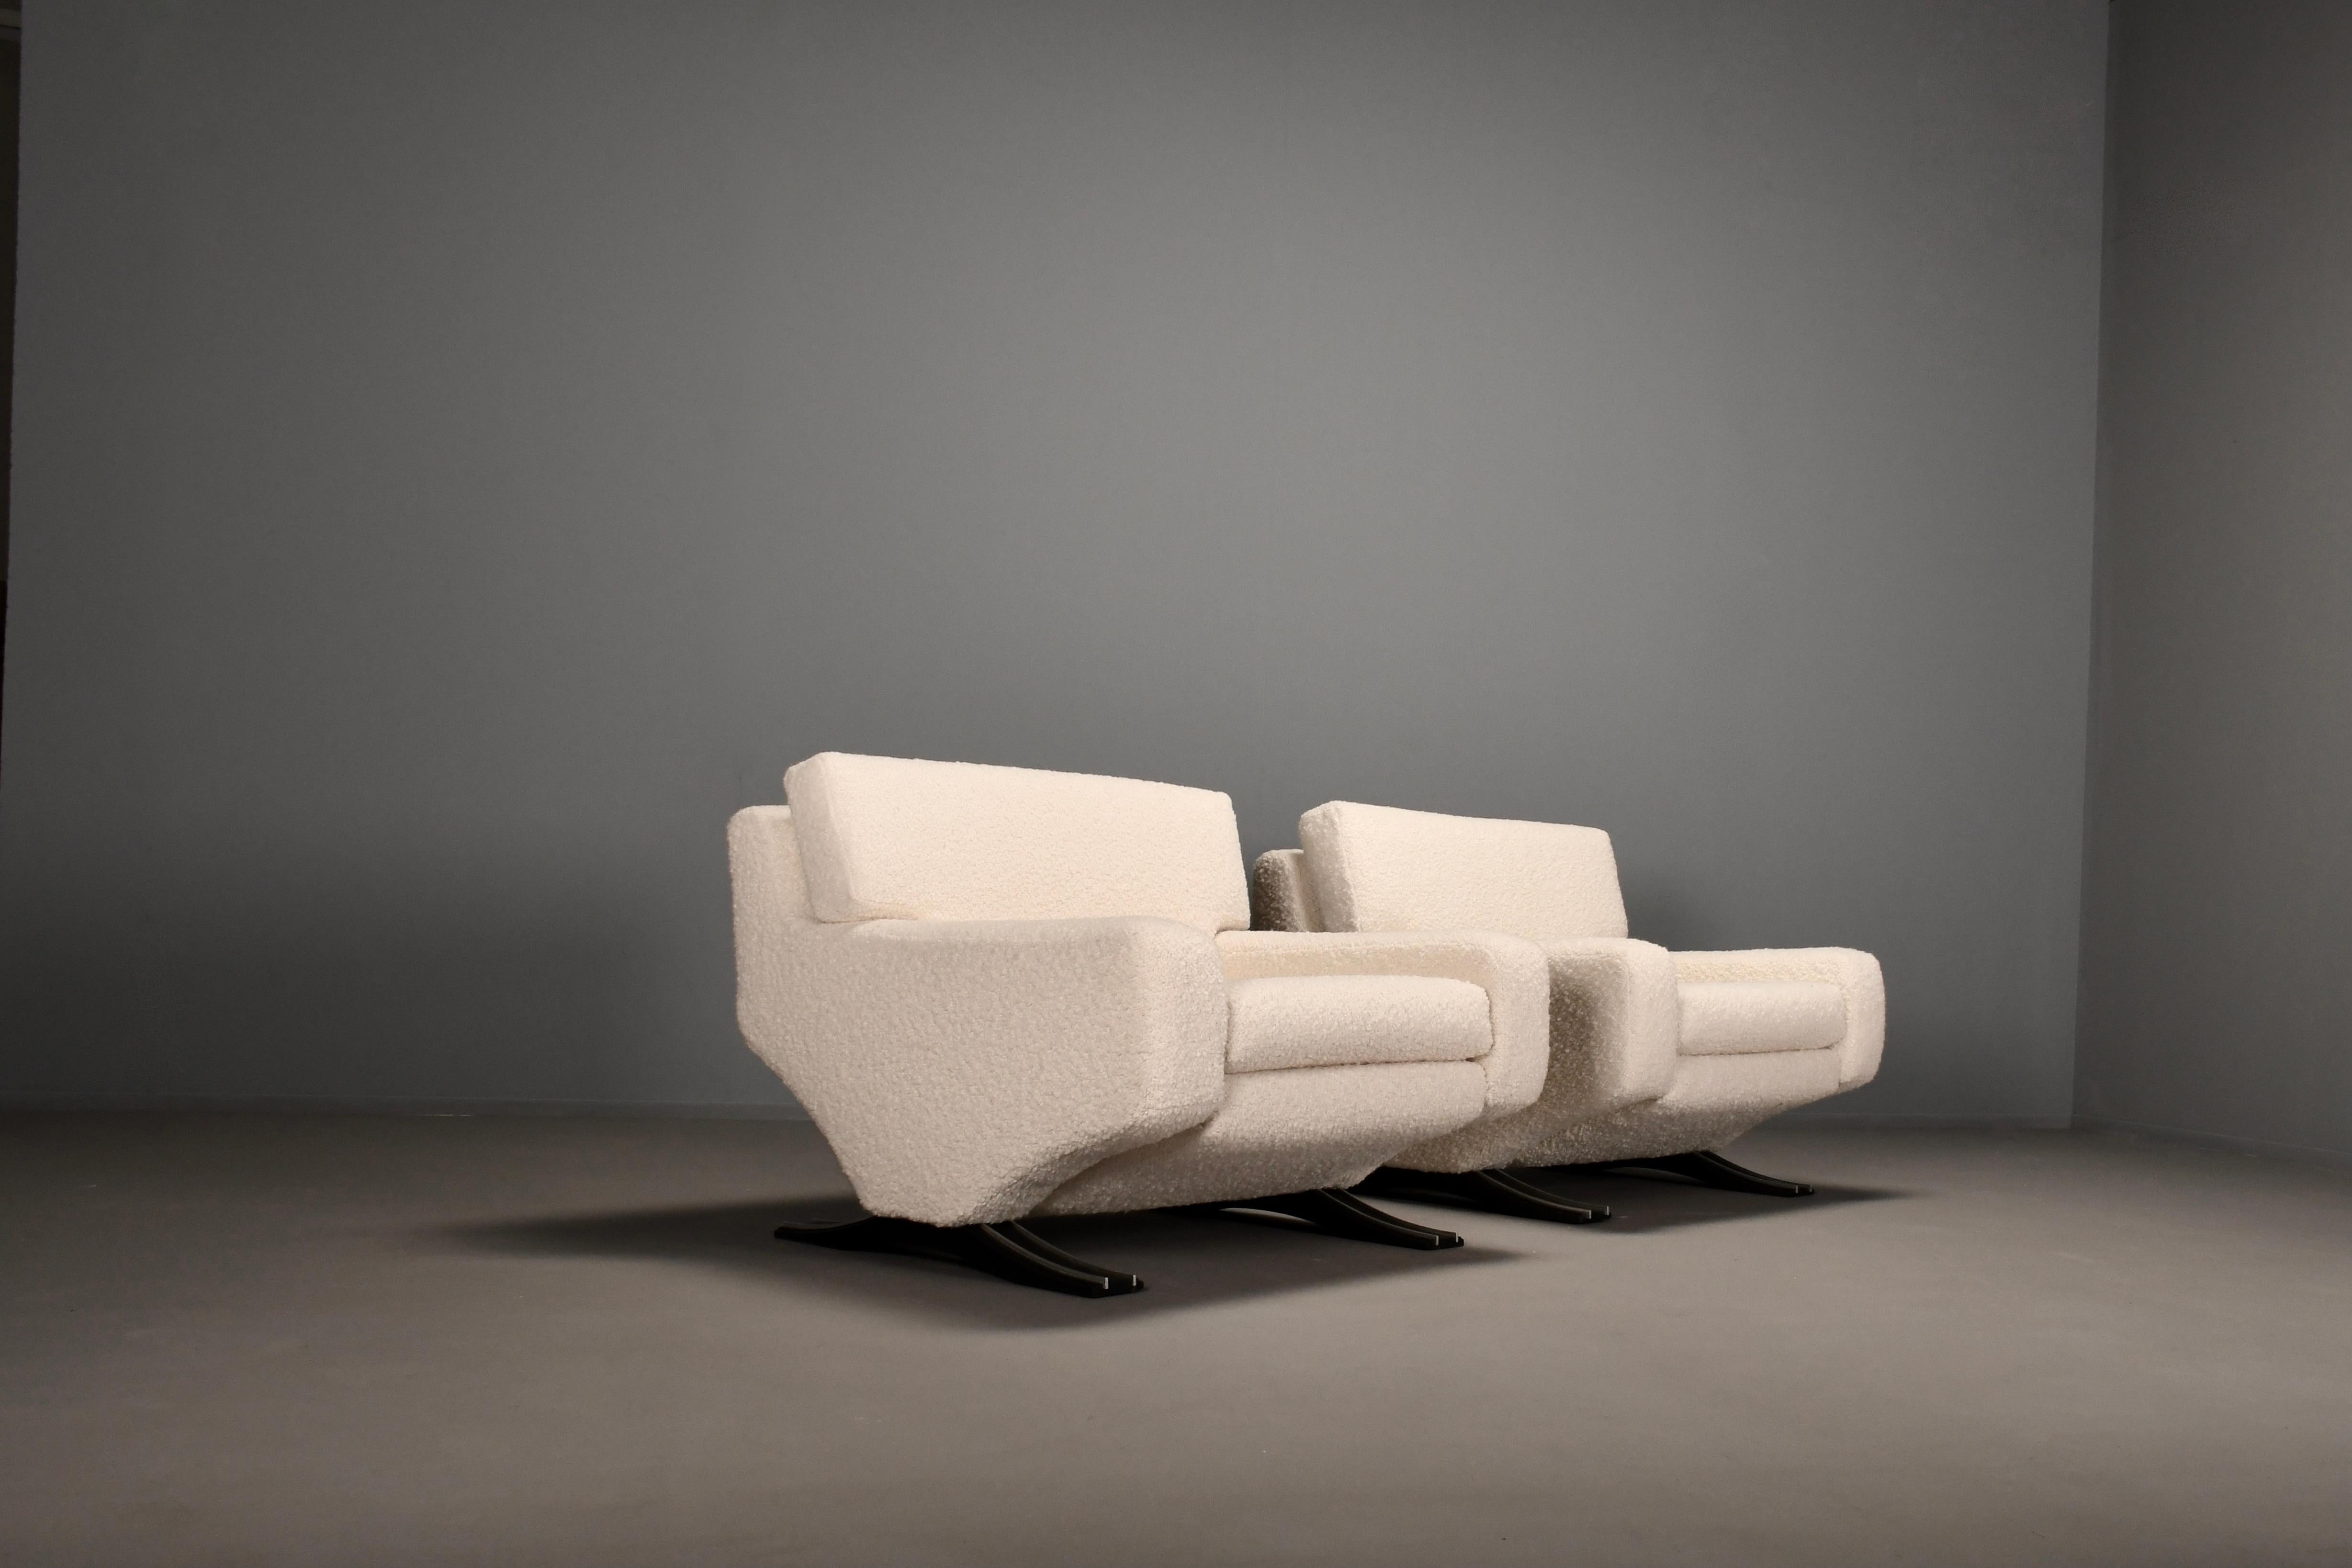 Beautiful formed Italian armchairs in excellent condition. 

Manufactured by the well known Italian design firm Flexform, Milan.

Designed by sculptor and artist Franz T Sartori in the 1960s.

Franz Sartori is best known for his organic sculptural